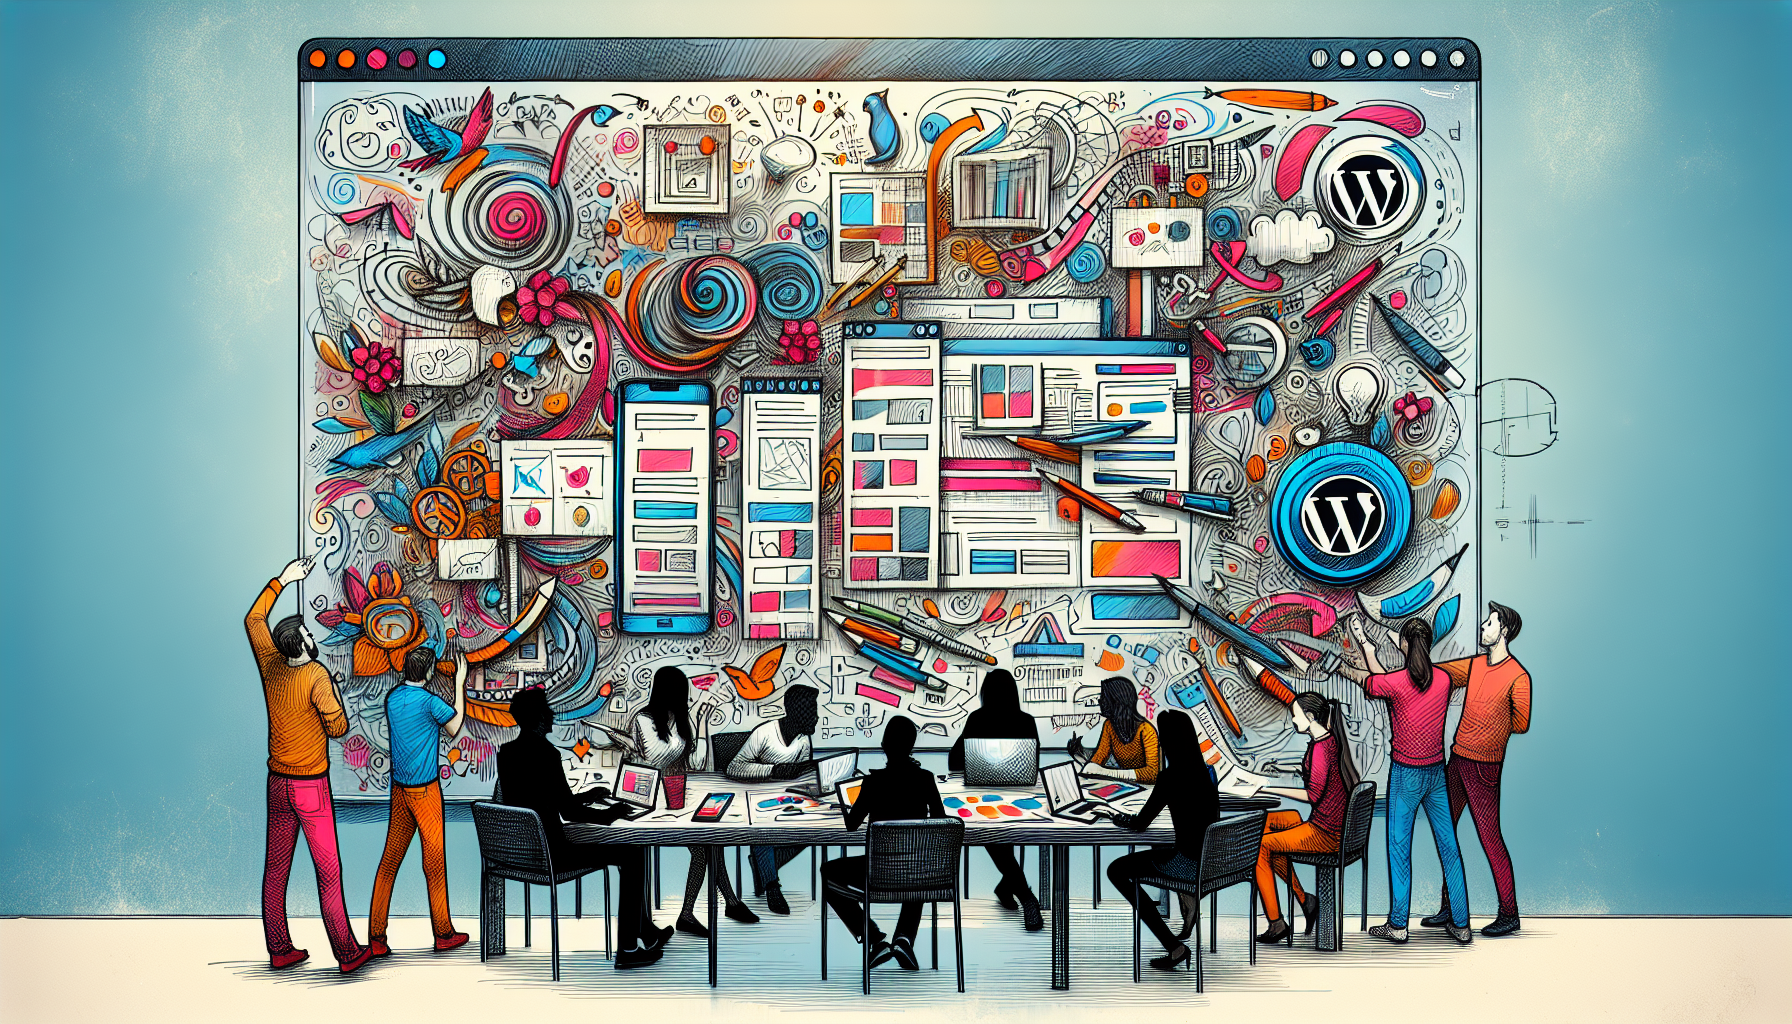 Illustration of a team of designers collaborating on a custom theme